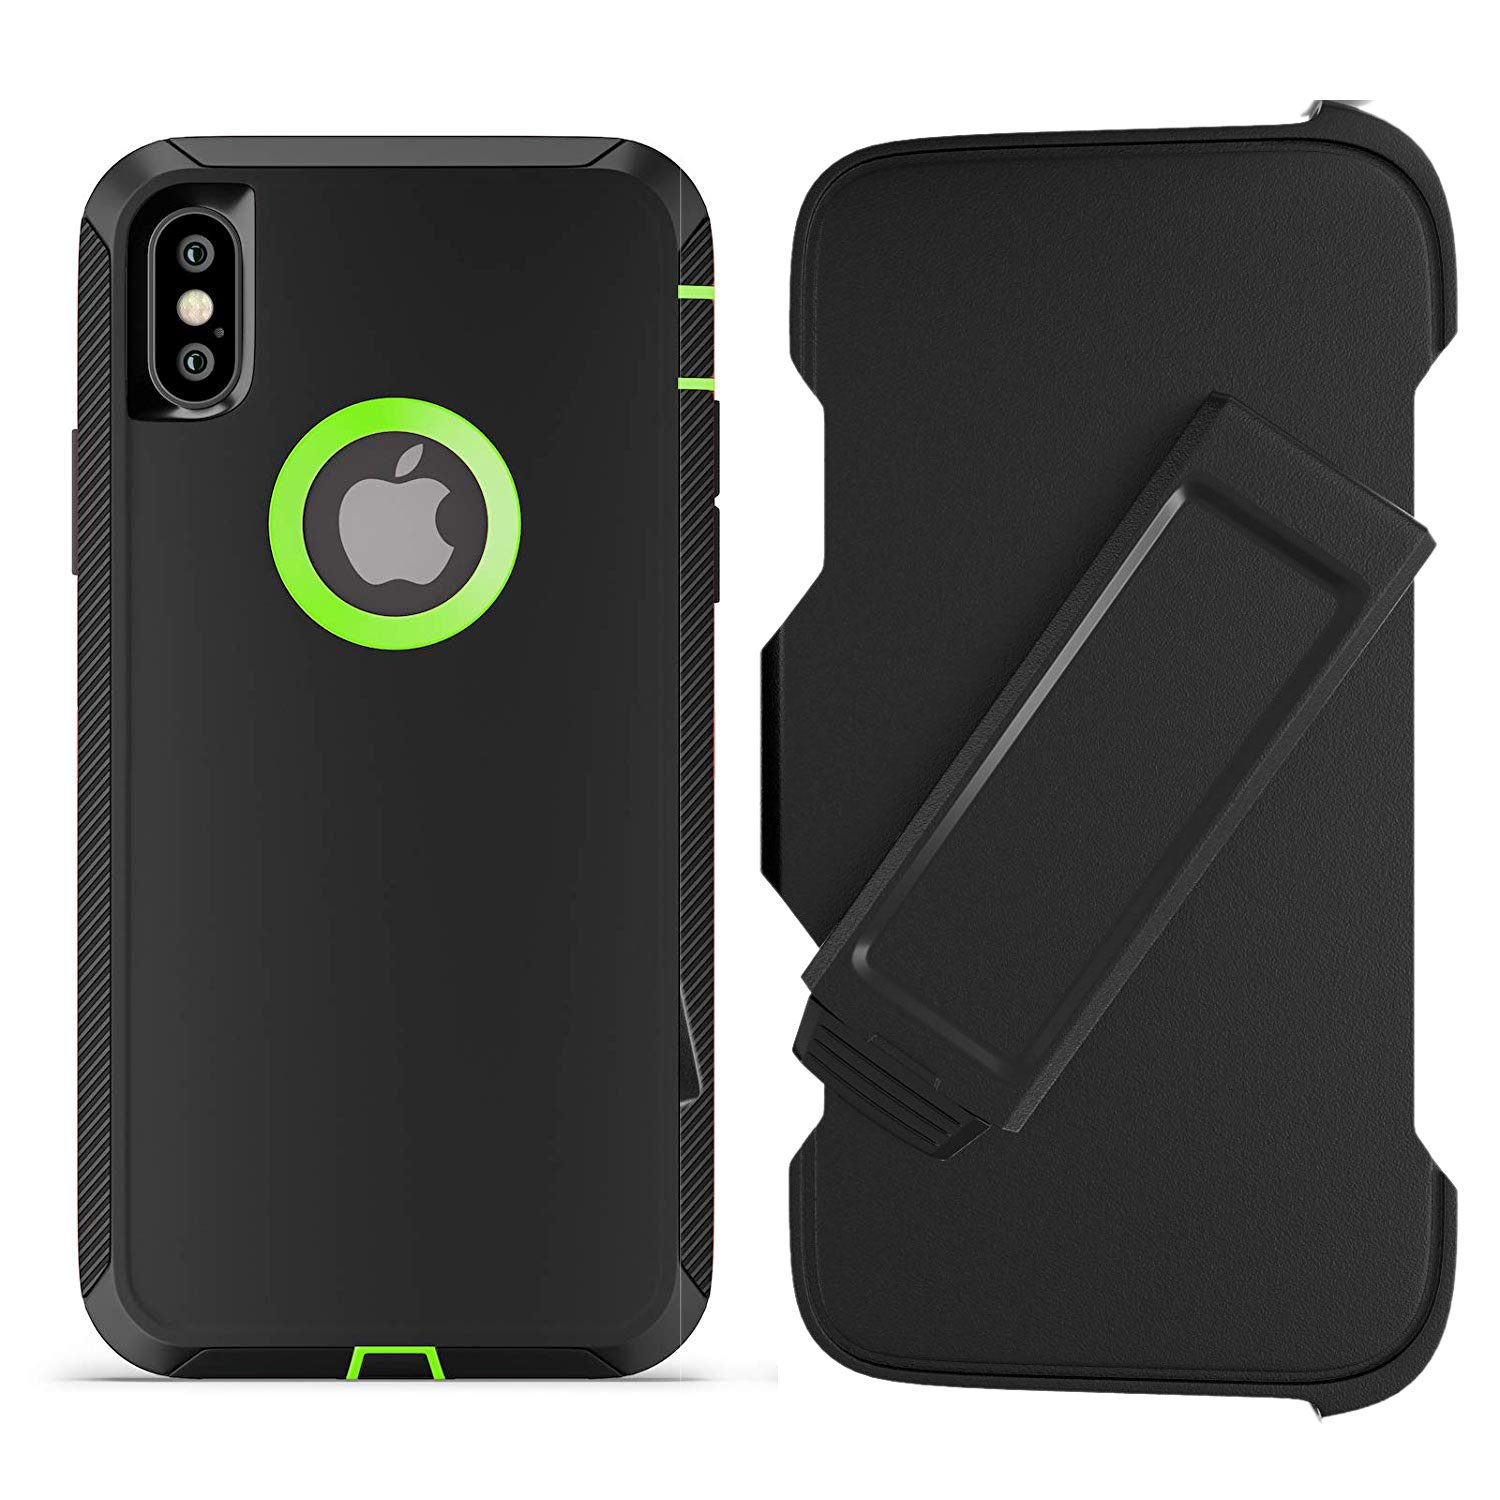 iPHONE Xs Max Armor Robot Case with Clip (Black Green)